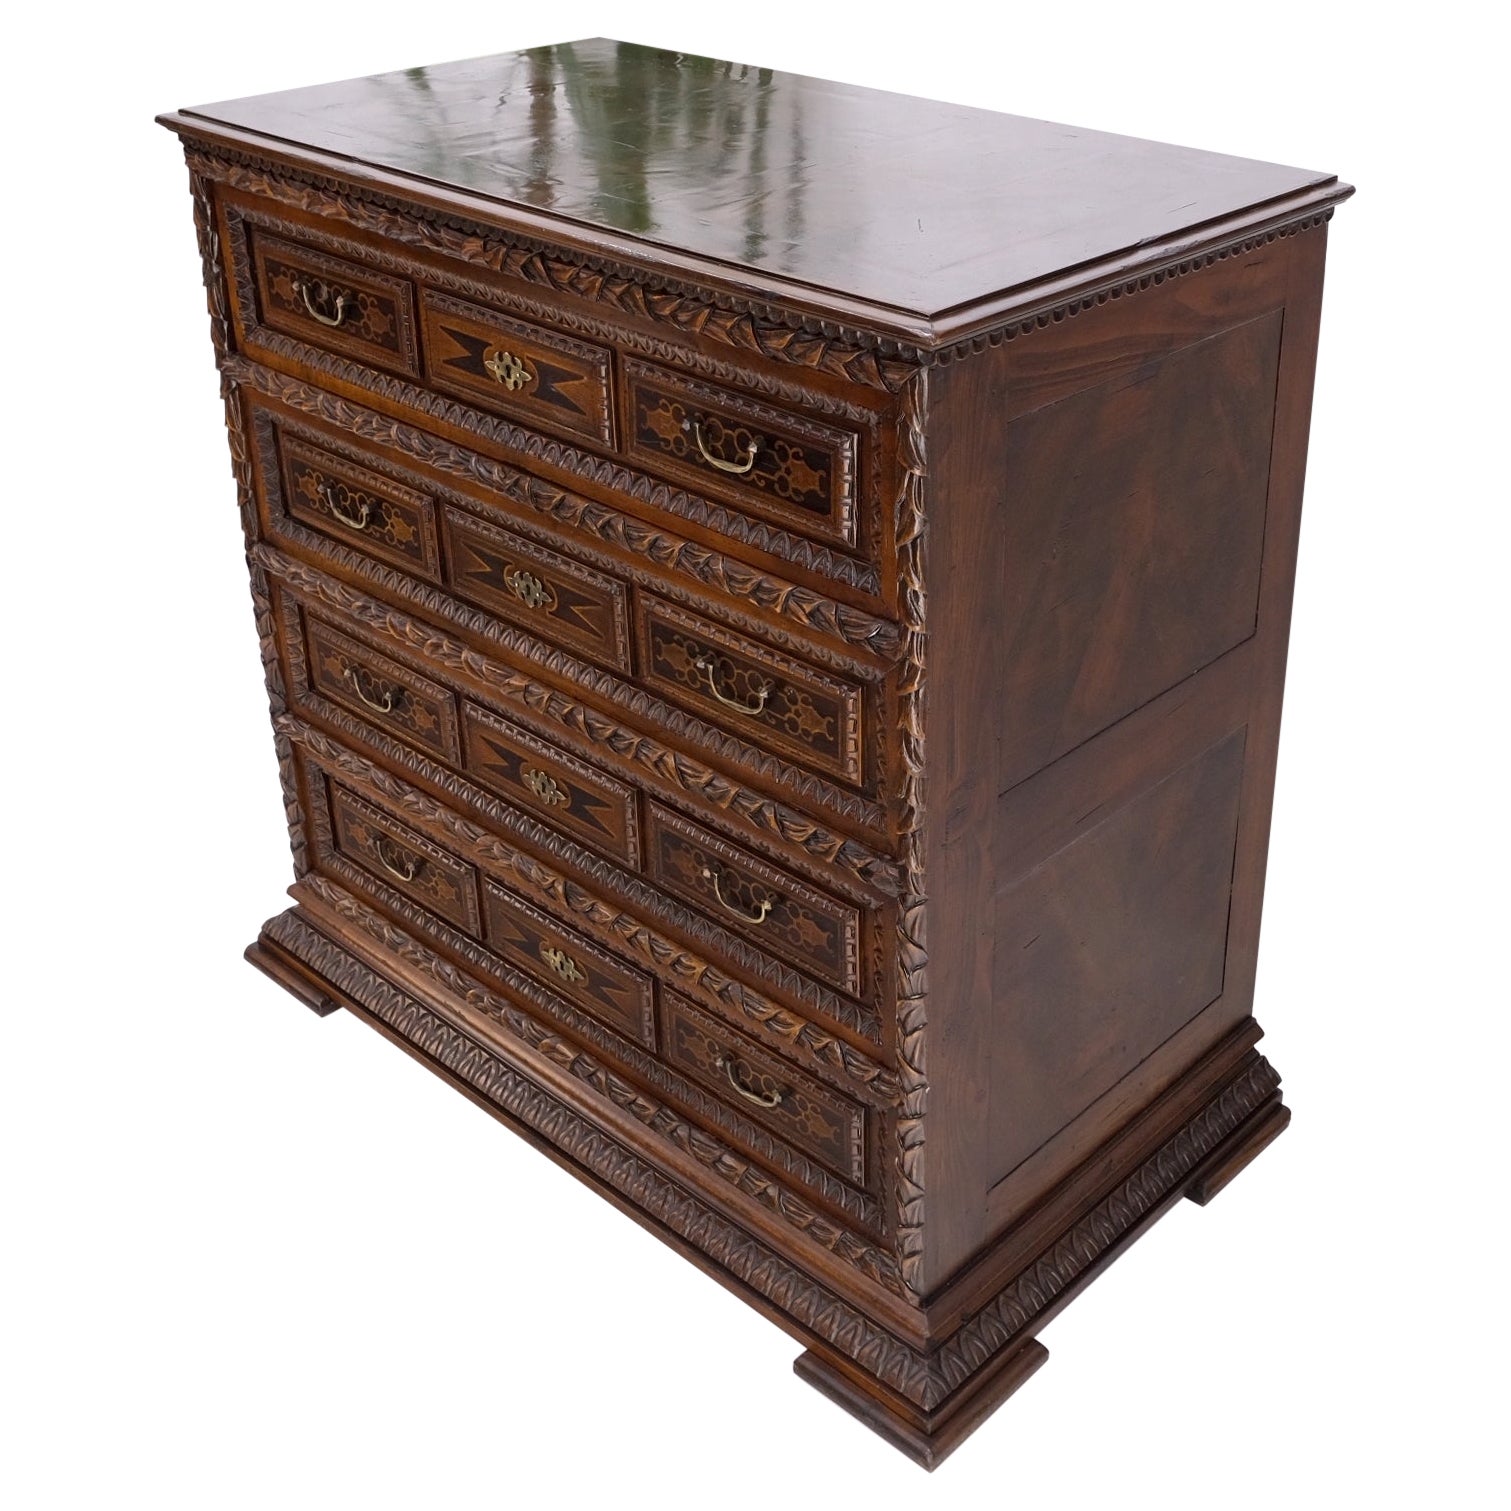 Heavily Carved Spanish Style 4 Drawers Commode Chest of Drawers Dresser Cabinet 